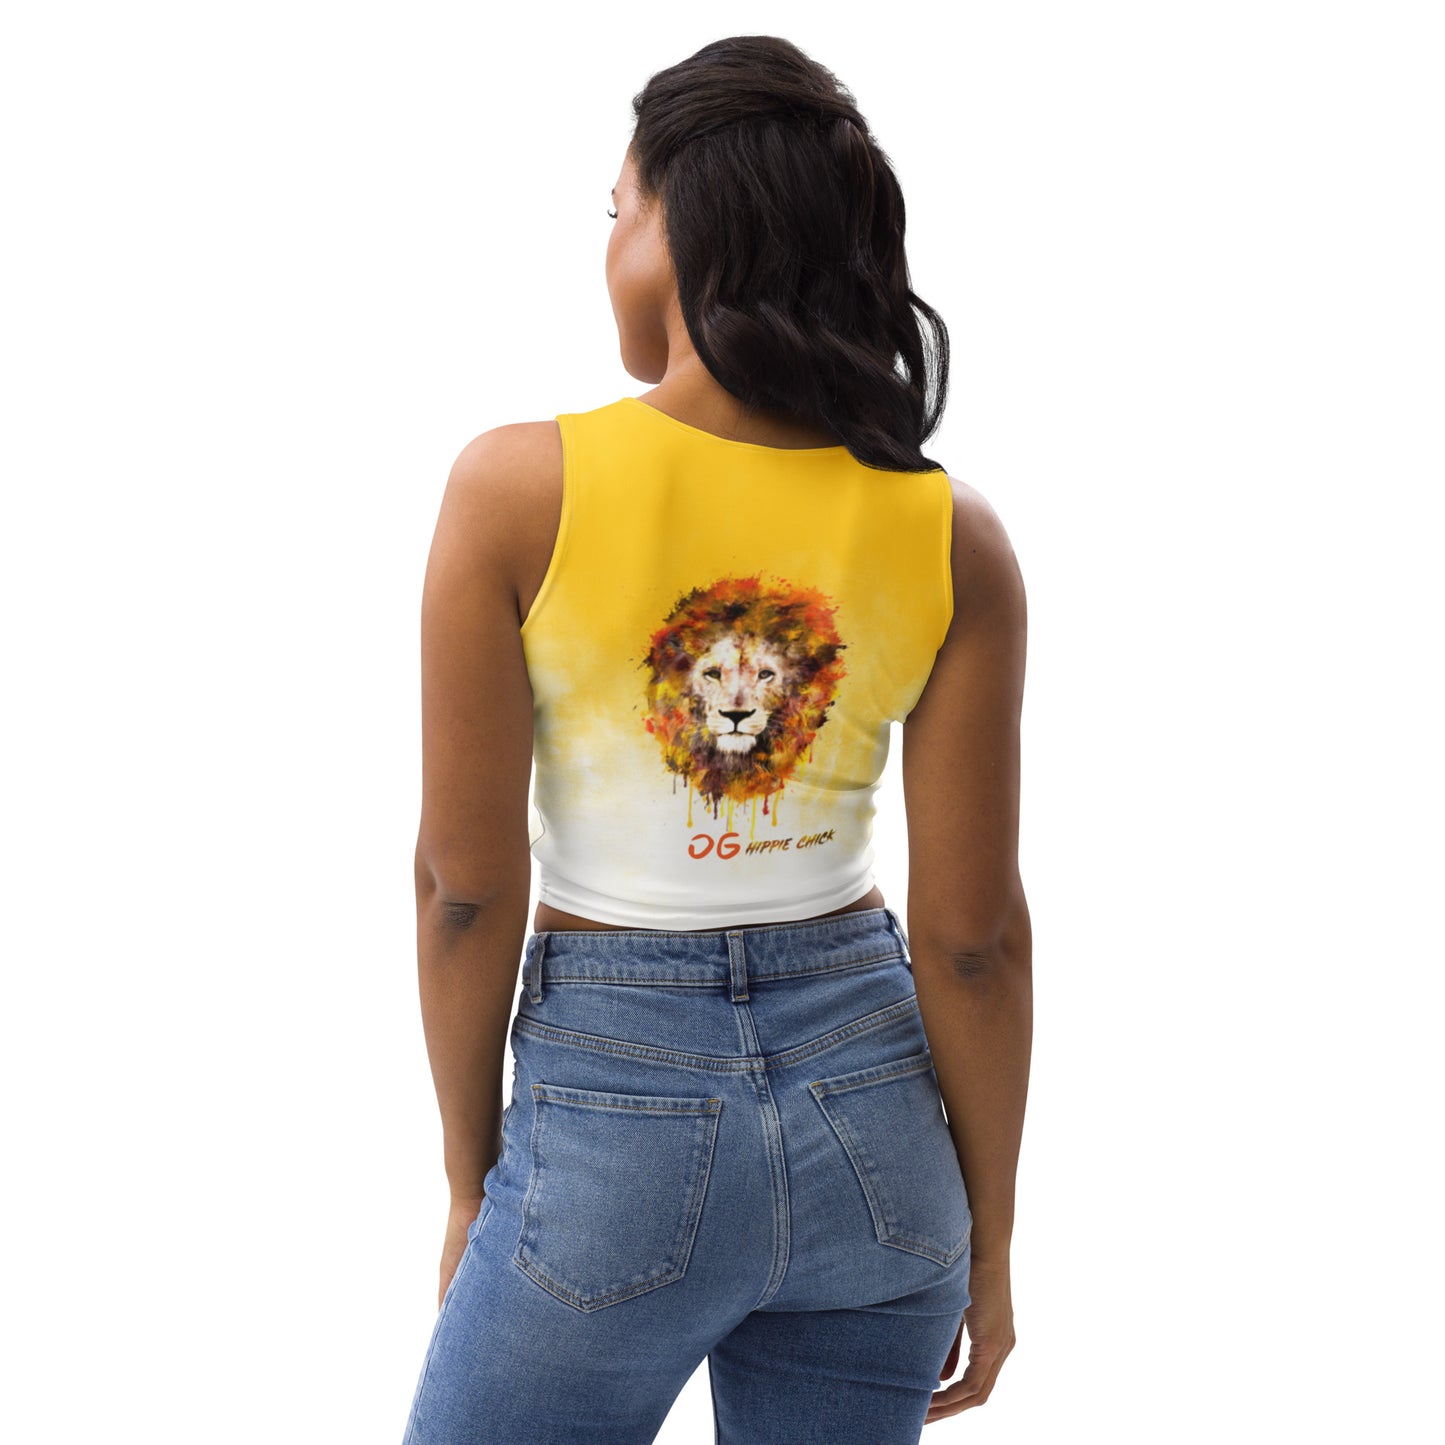 Sunny Day Crop Top - OG Hippie Chick